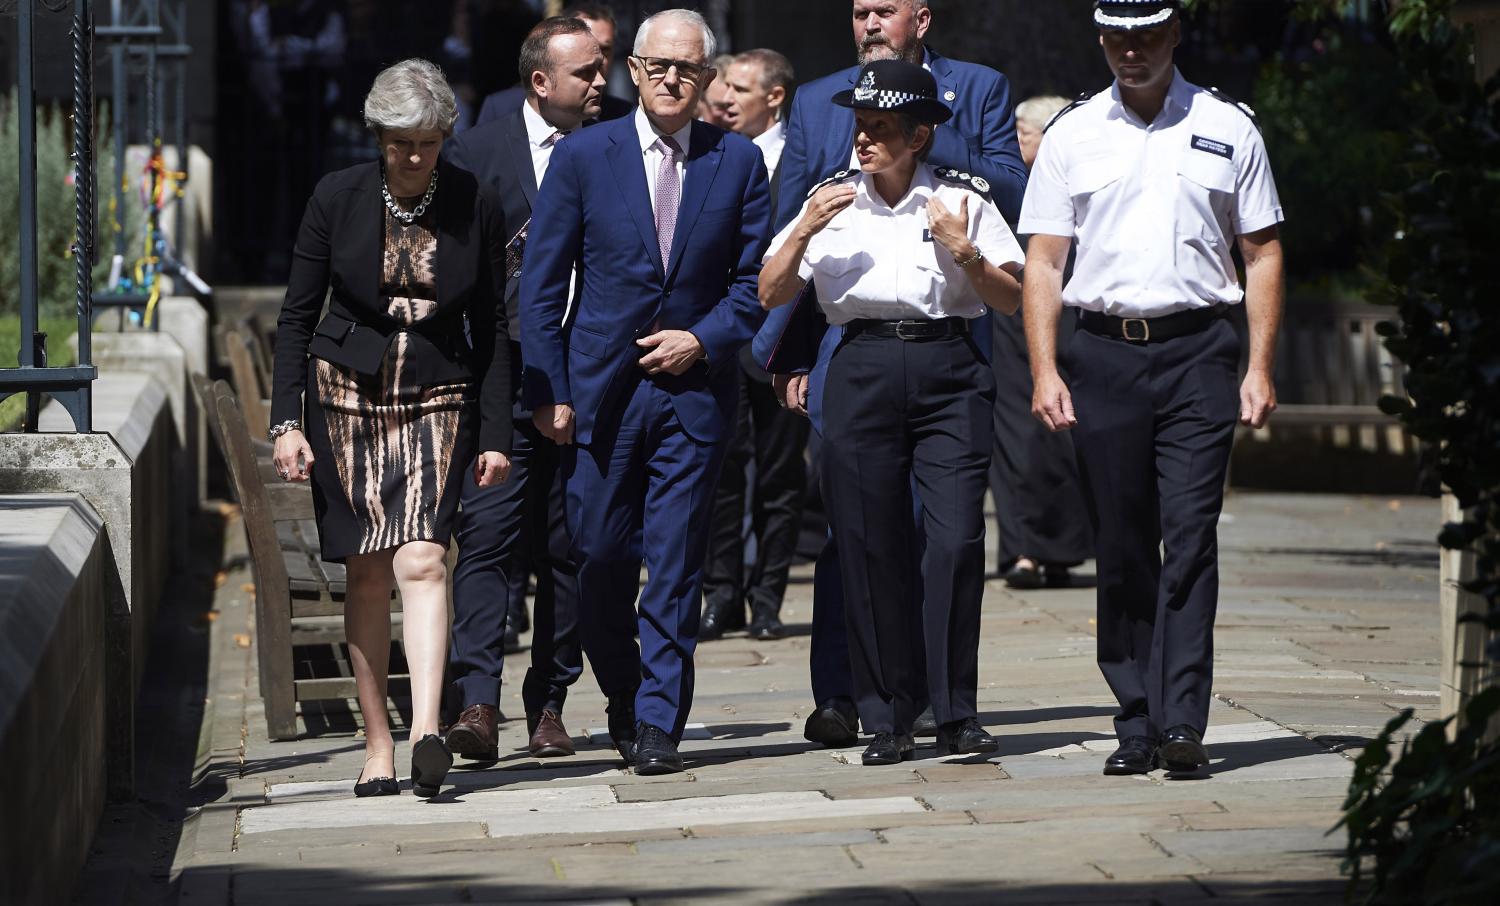 The UK PM Theresa May and Australian PM Malcolm Turnbull speaking with first responders from London's 3 June terrorist attack  last week (Photo: Niklas Hallen/Getty Images)